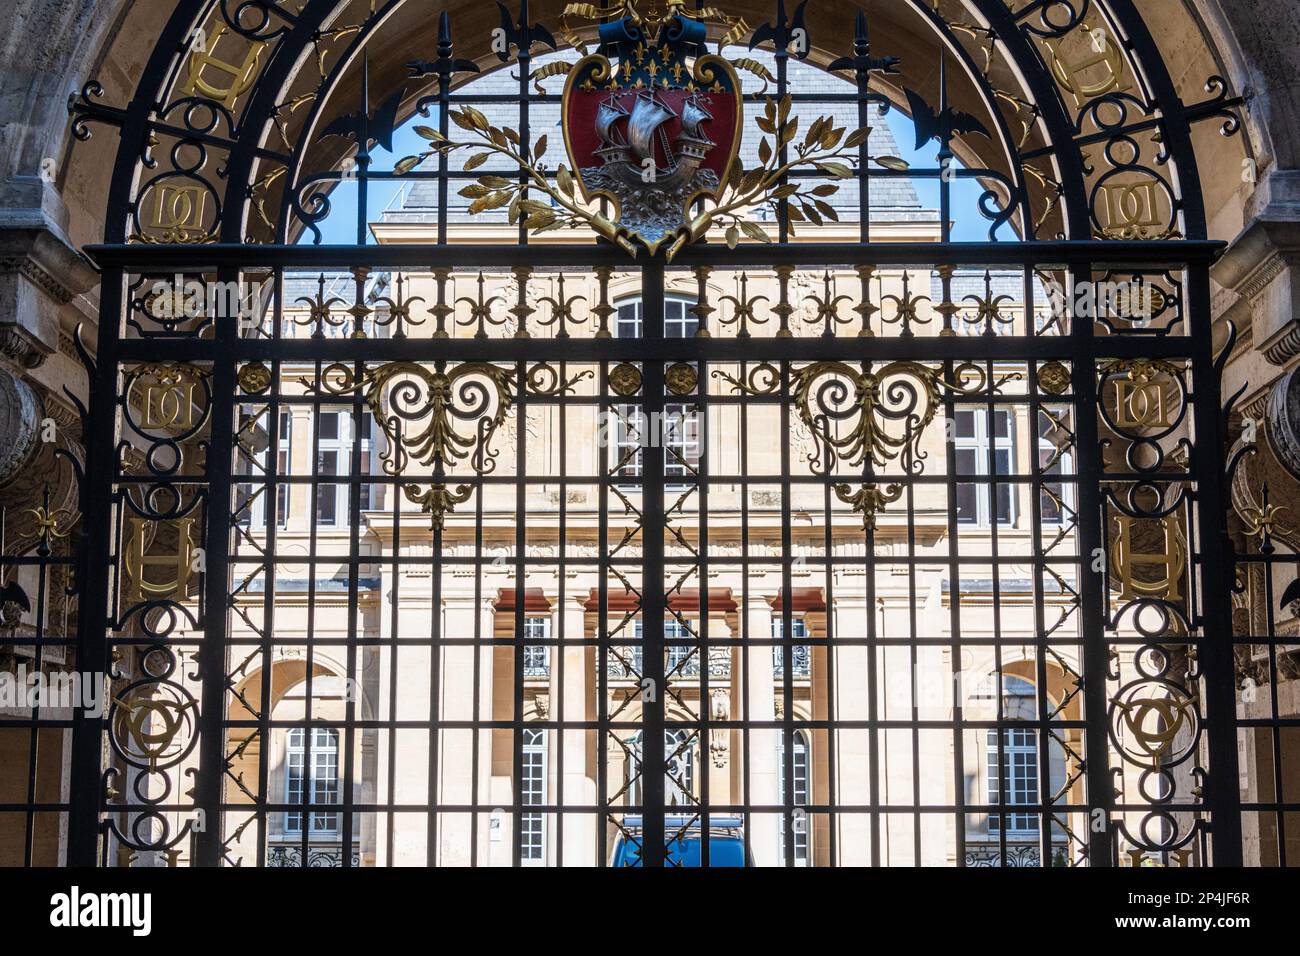 The Wrought Iron Gates on Rue des Francs Bourgeois at the Carnavalat Museum in the Marais, France. Stock Photo